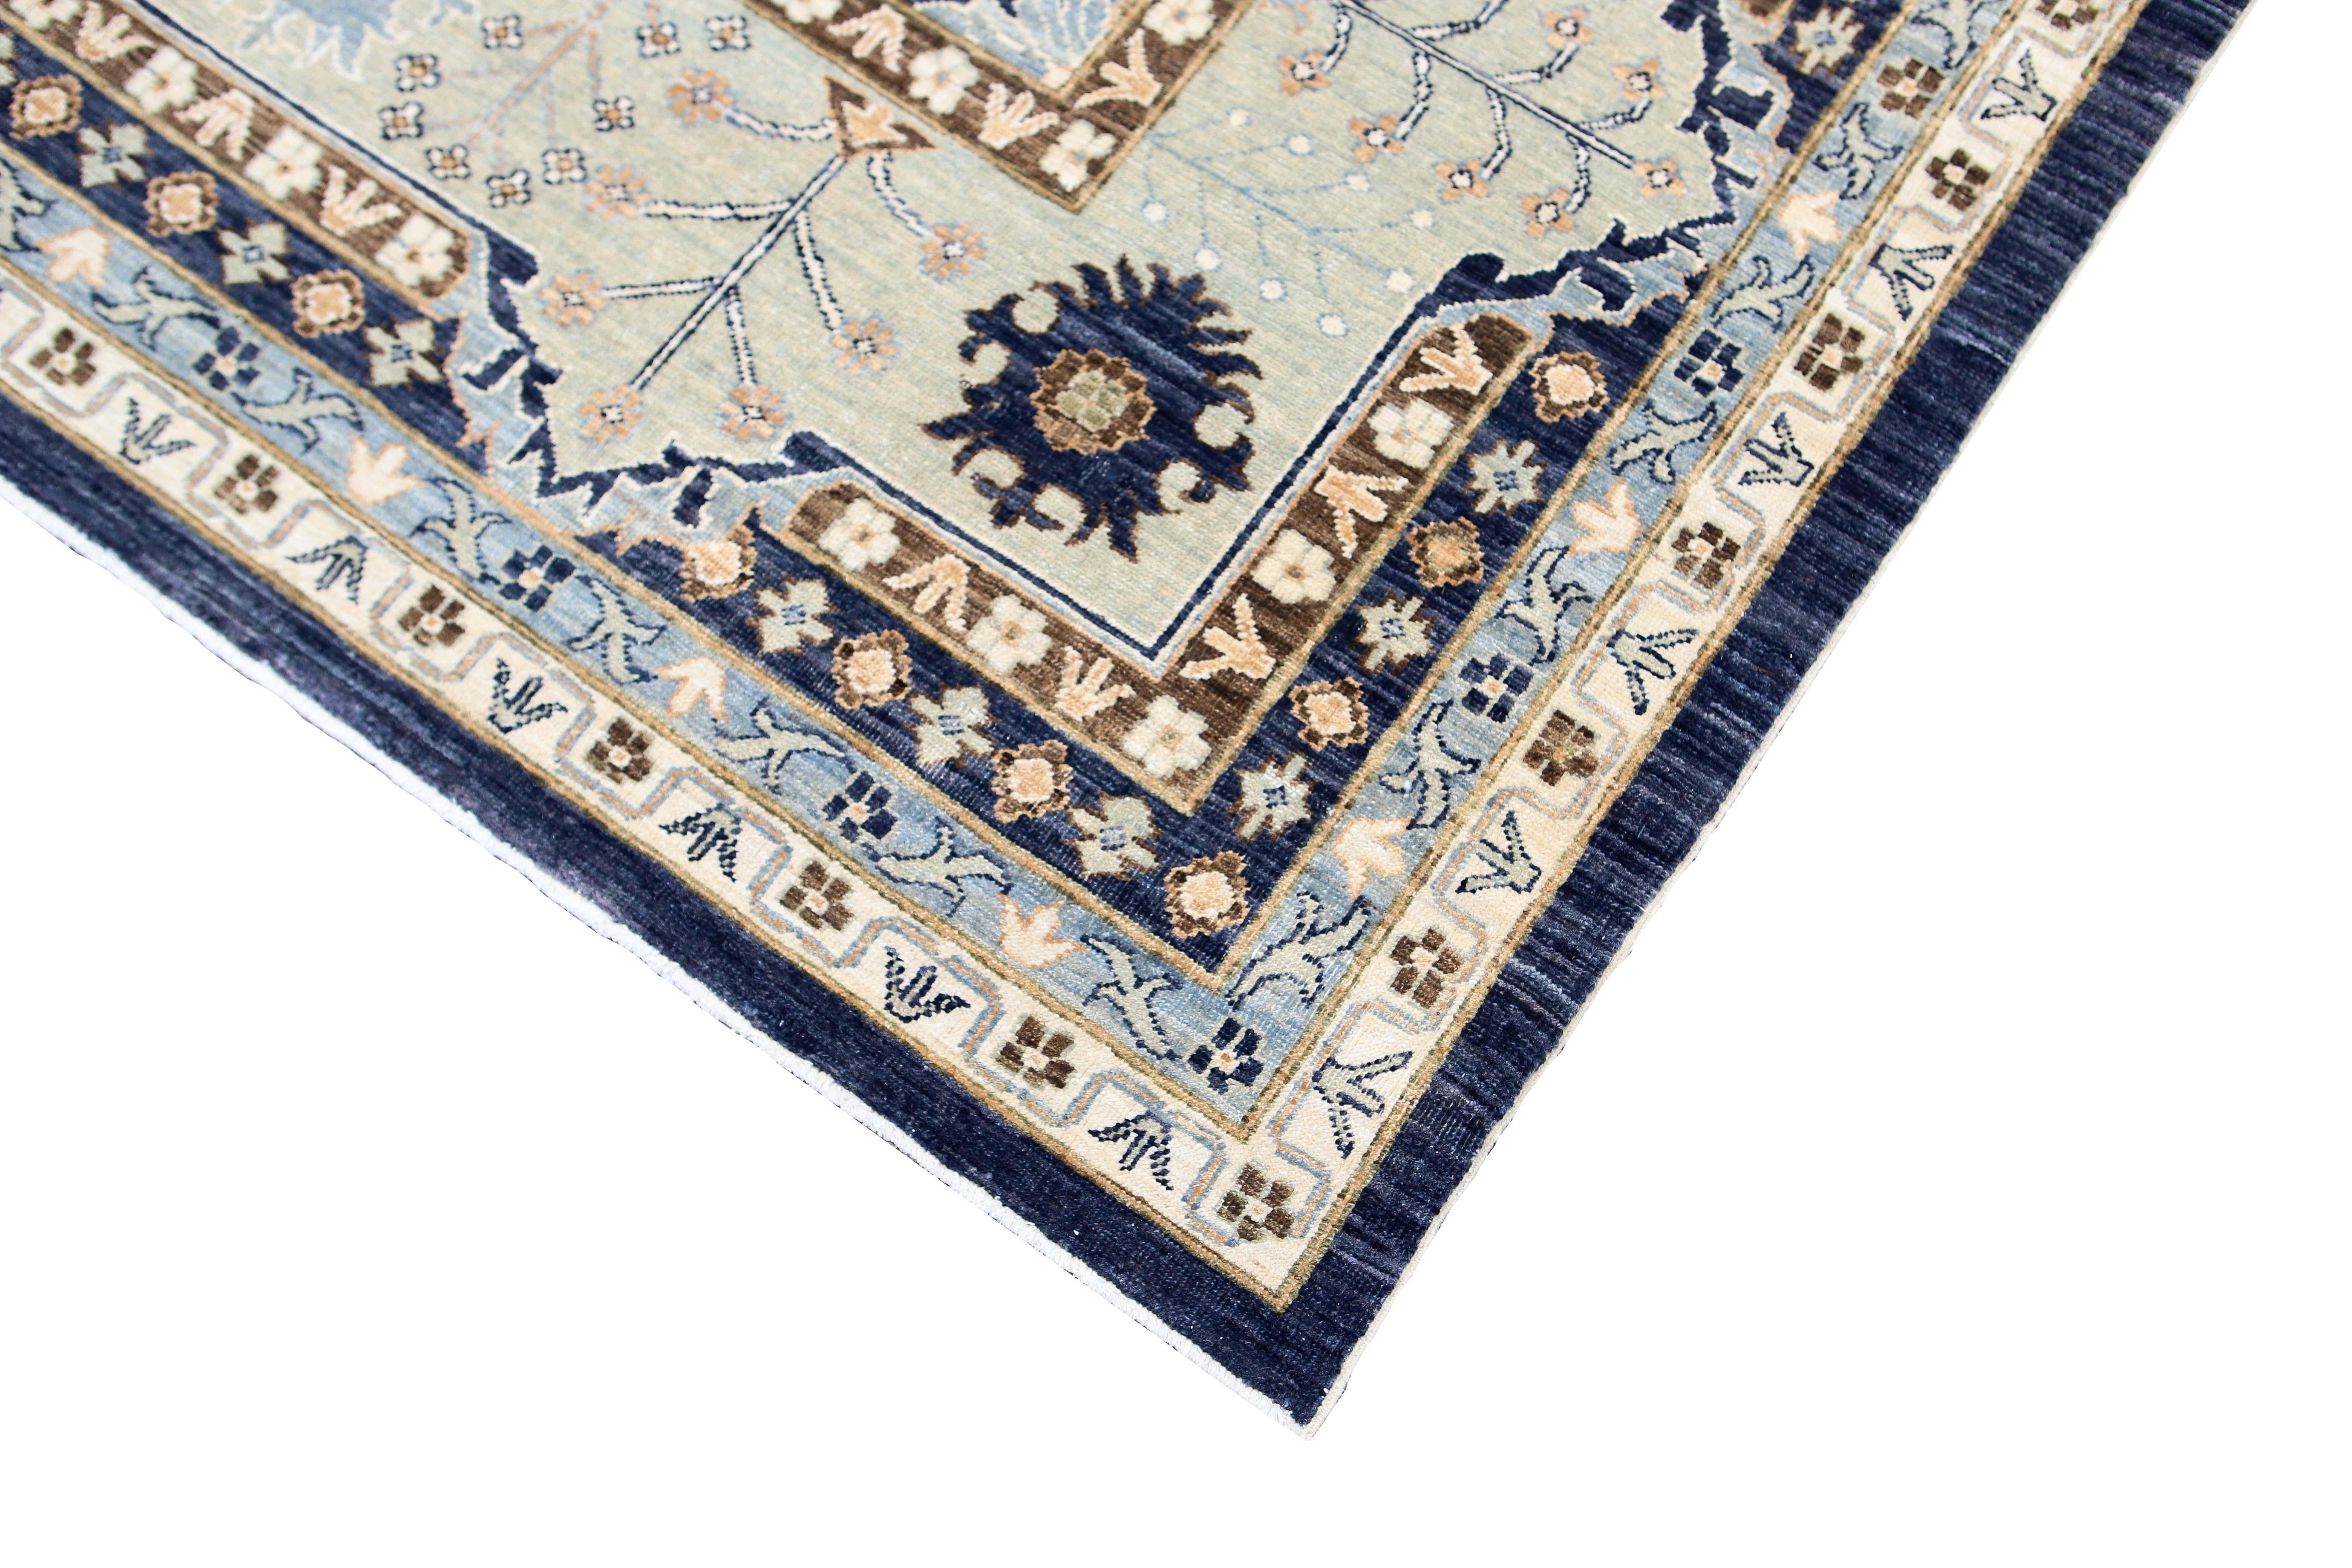 Blue white Afgan designed 10 x 14 rug.
Hand knotted with hand-spun wool, woven in Afghanistan. This beautifully designed rug will be sure to stand out in any room.
Made of 100% wool.
Yarn-dyed for vibrant, lasting color. Measures: 10'4' x 13’10